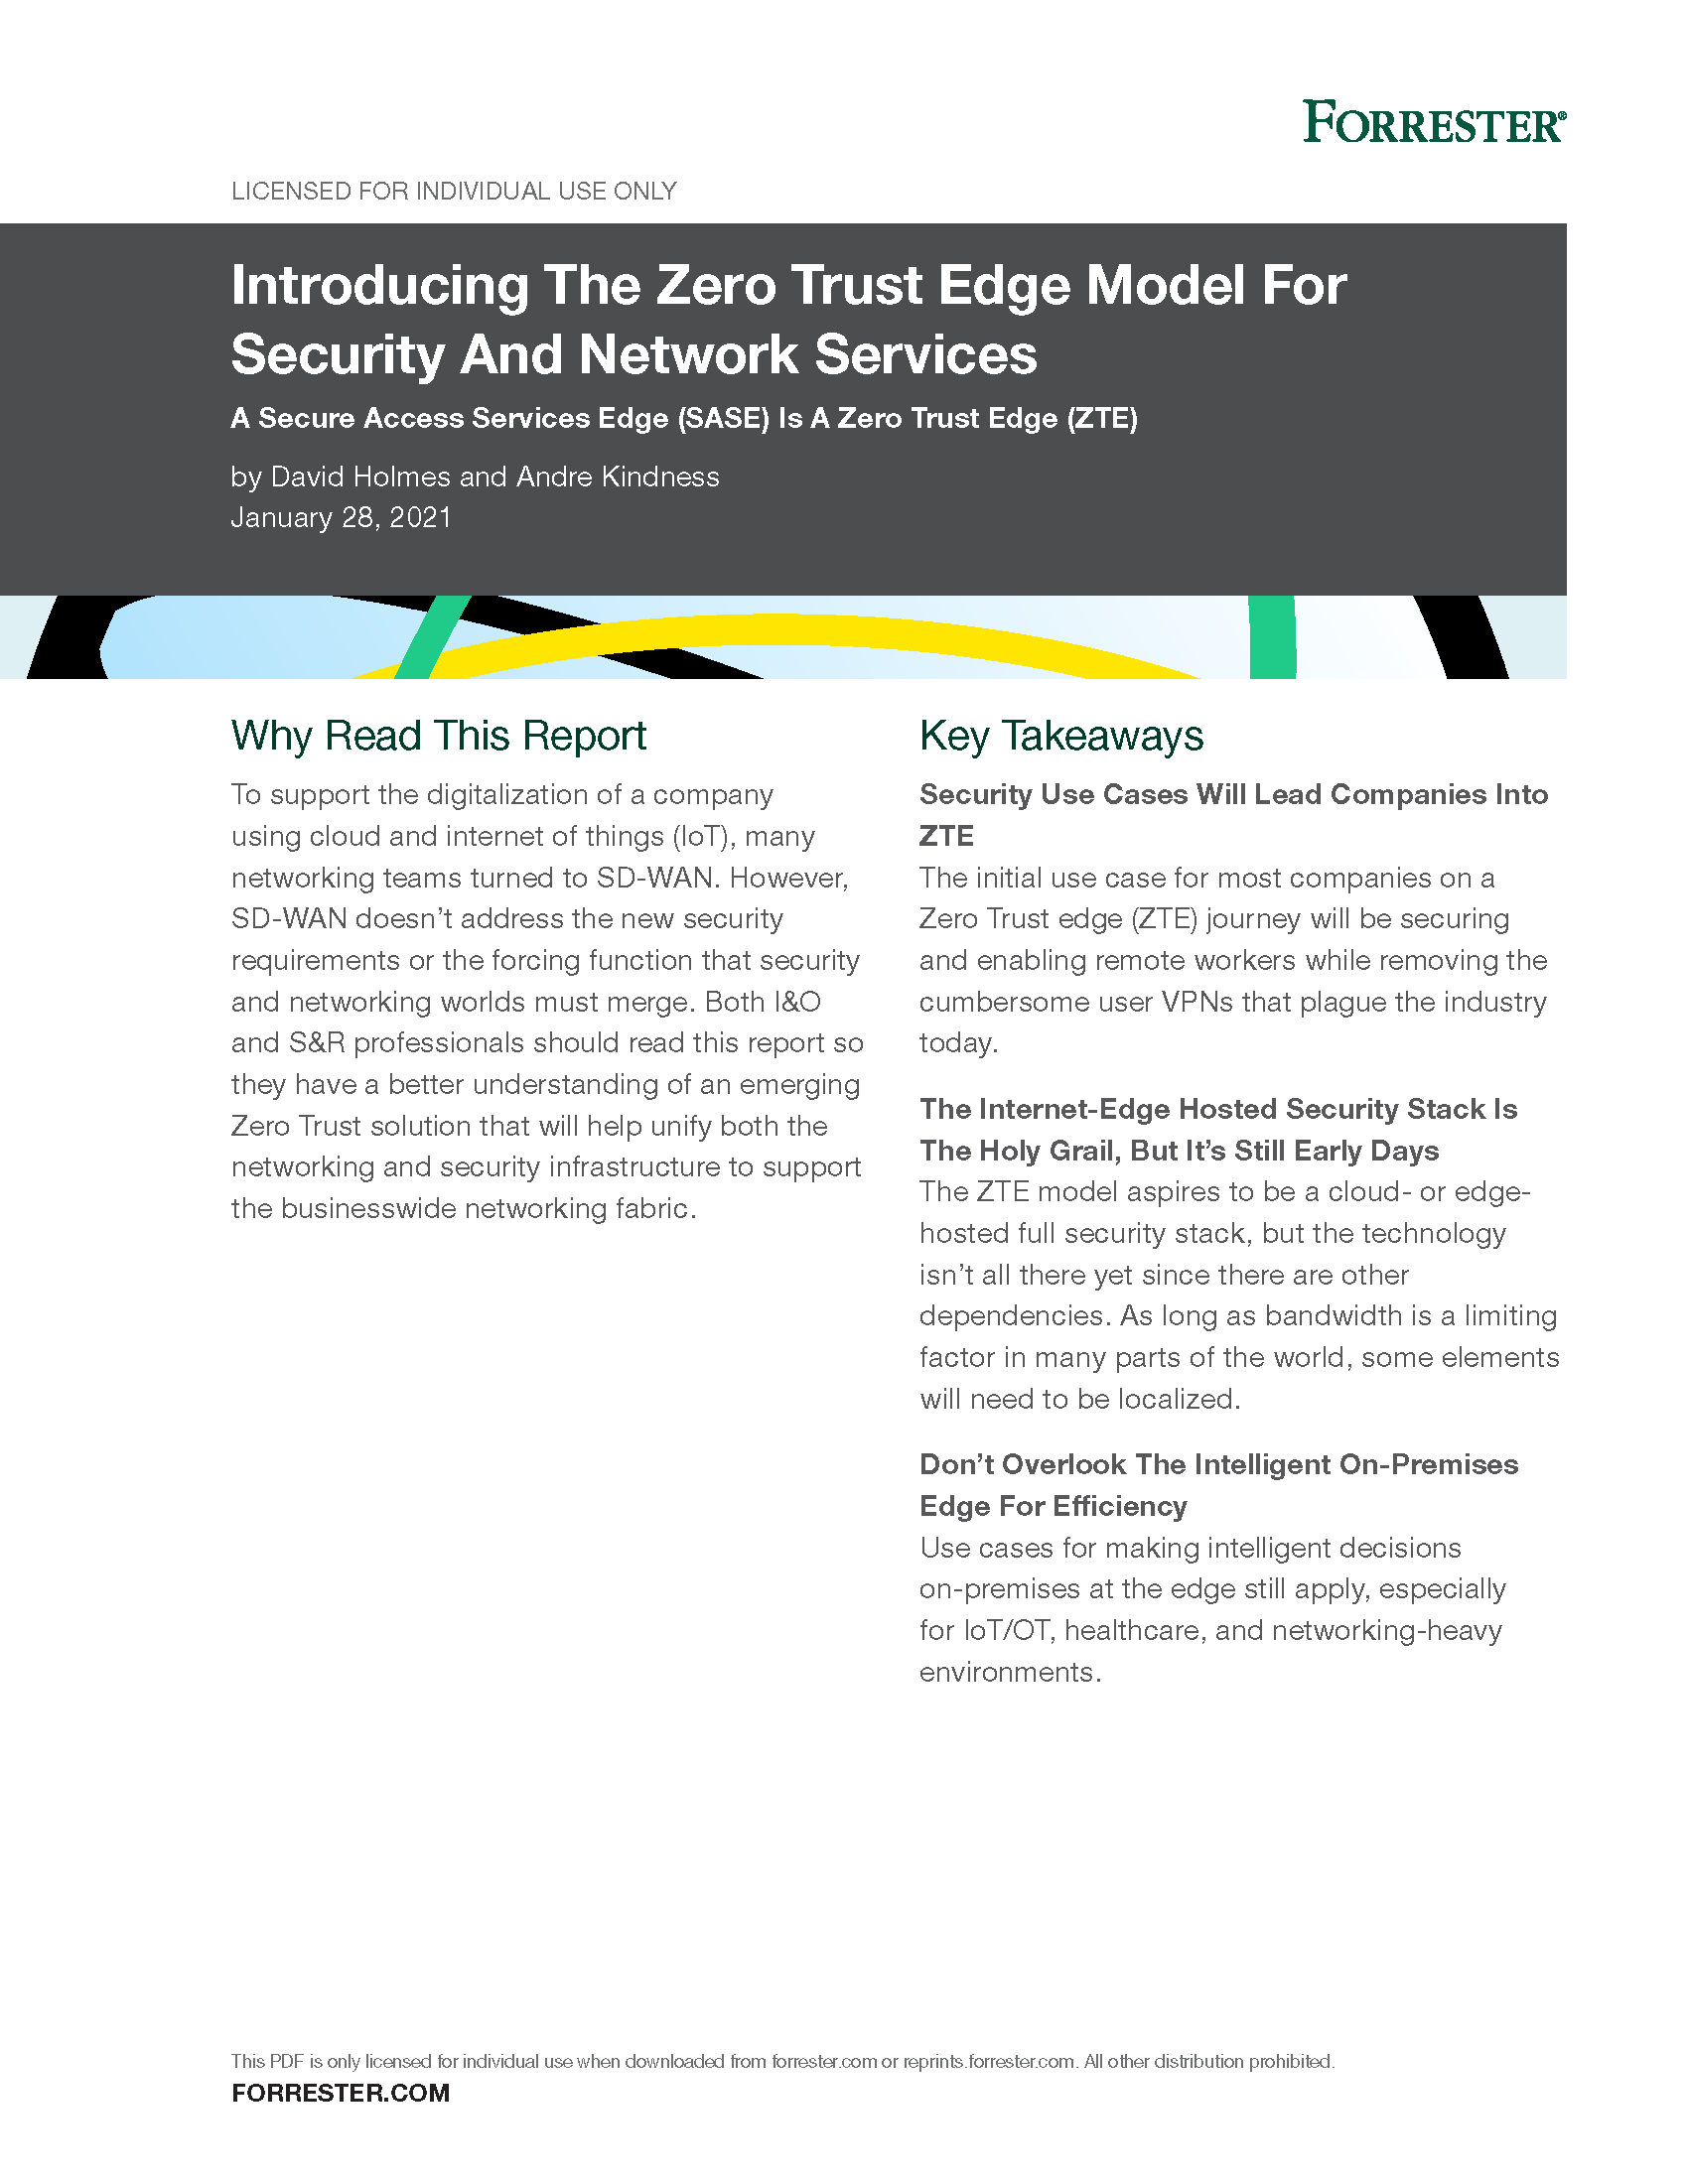 Pages from Forrester - 2021_01 - Introducing The Zero Trust Edge Model For Security And Network Services